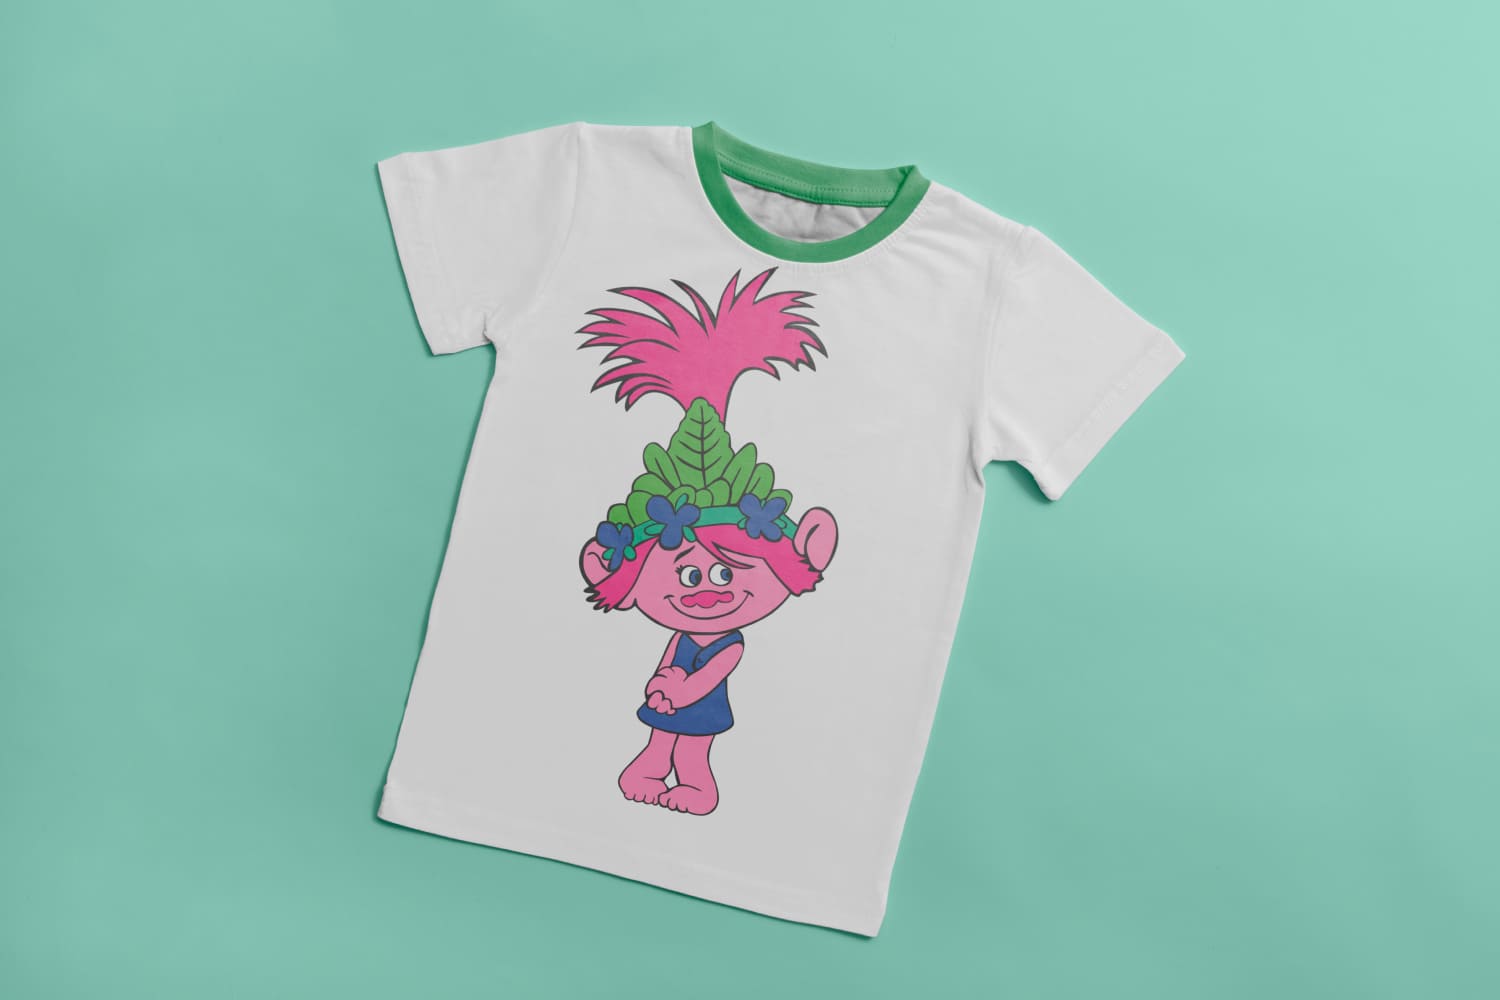 White T-shirt with green collar and image of cartoon character - Poppy.